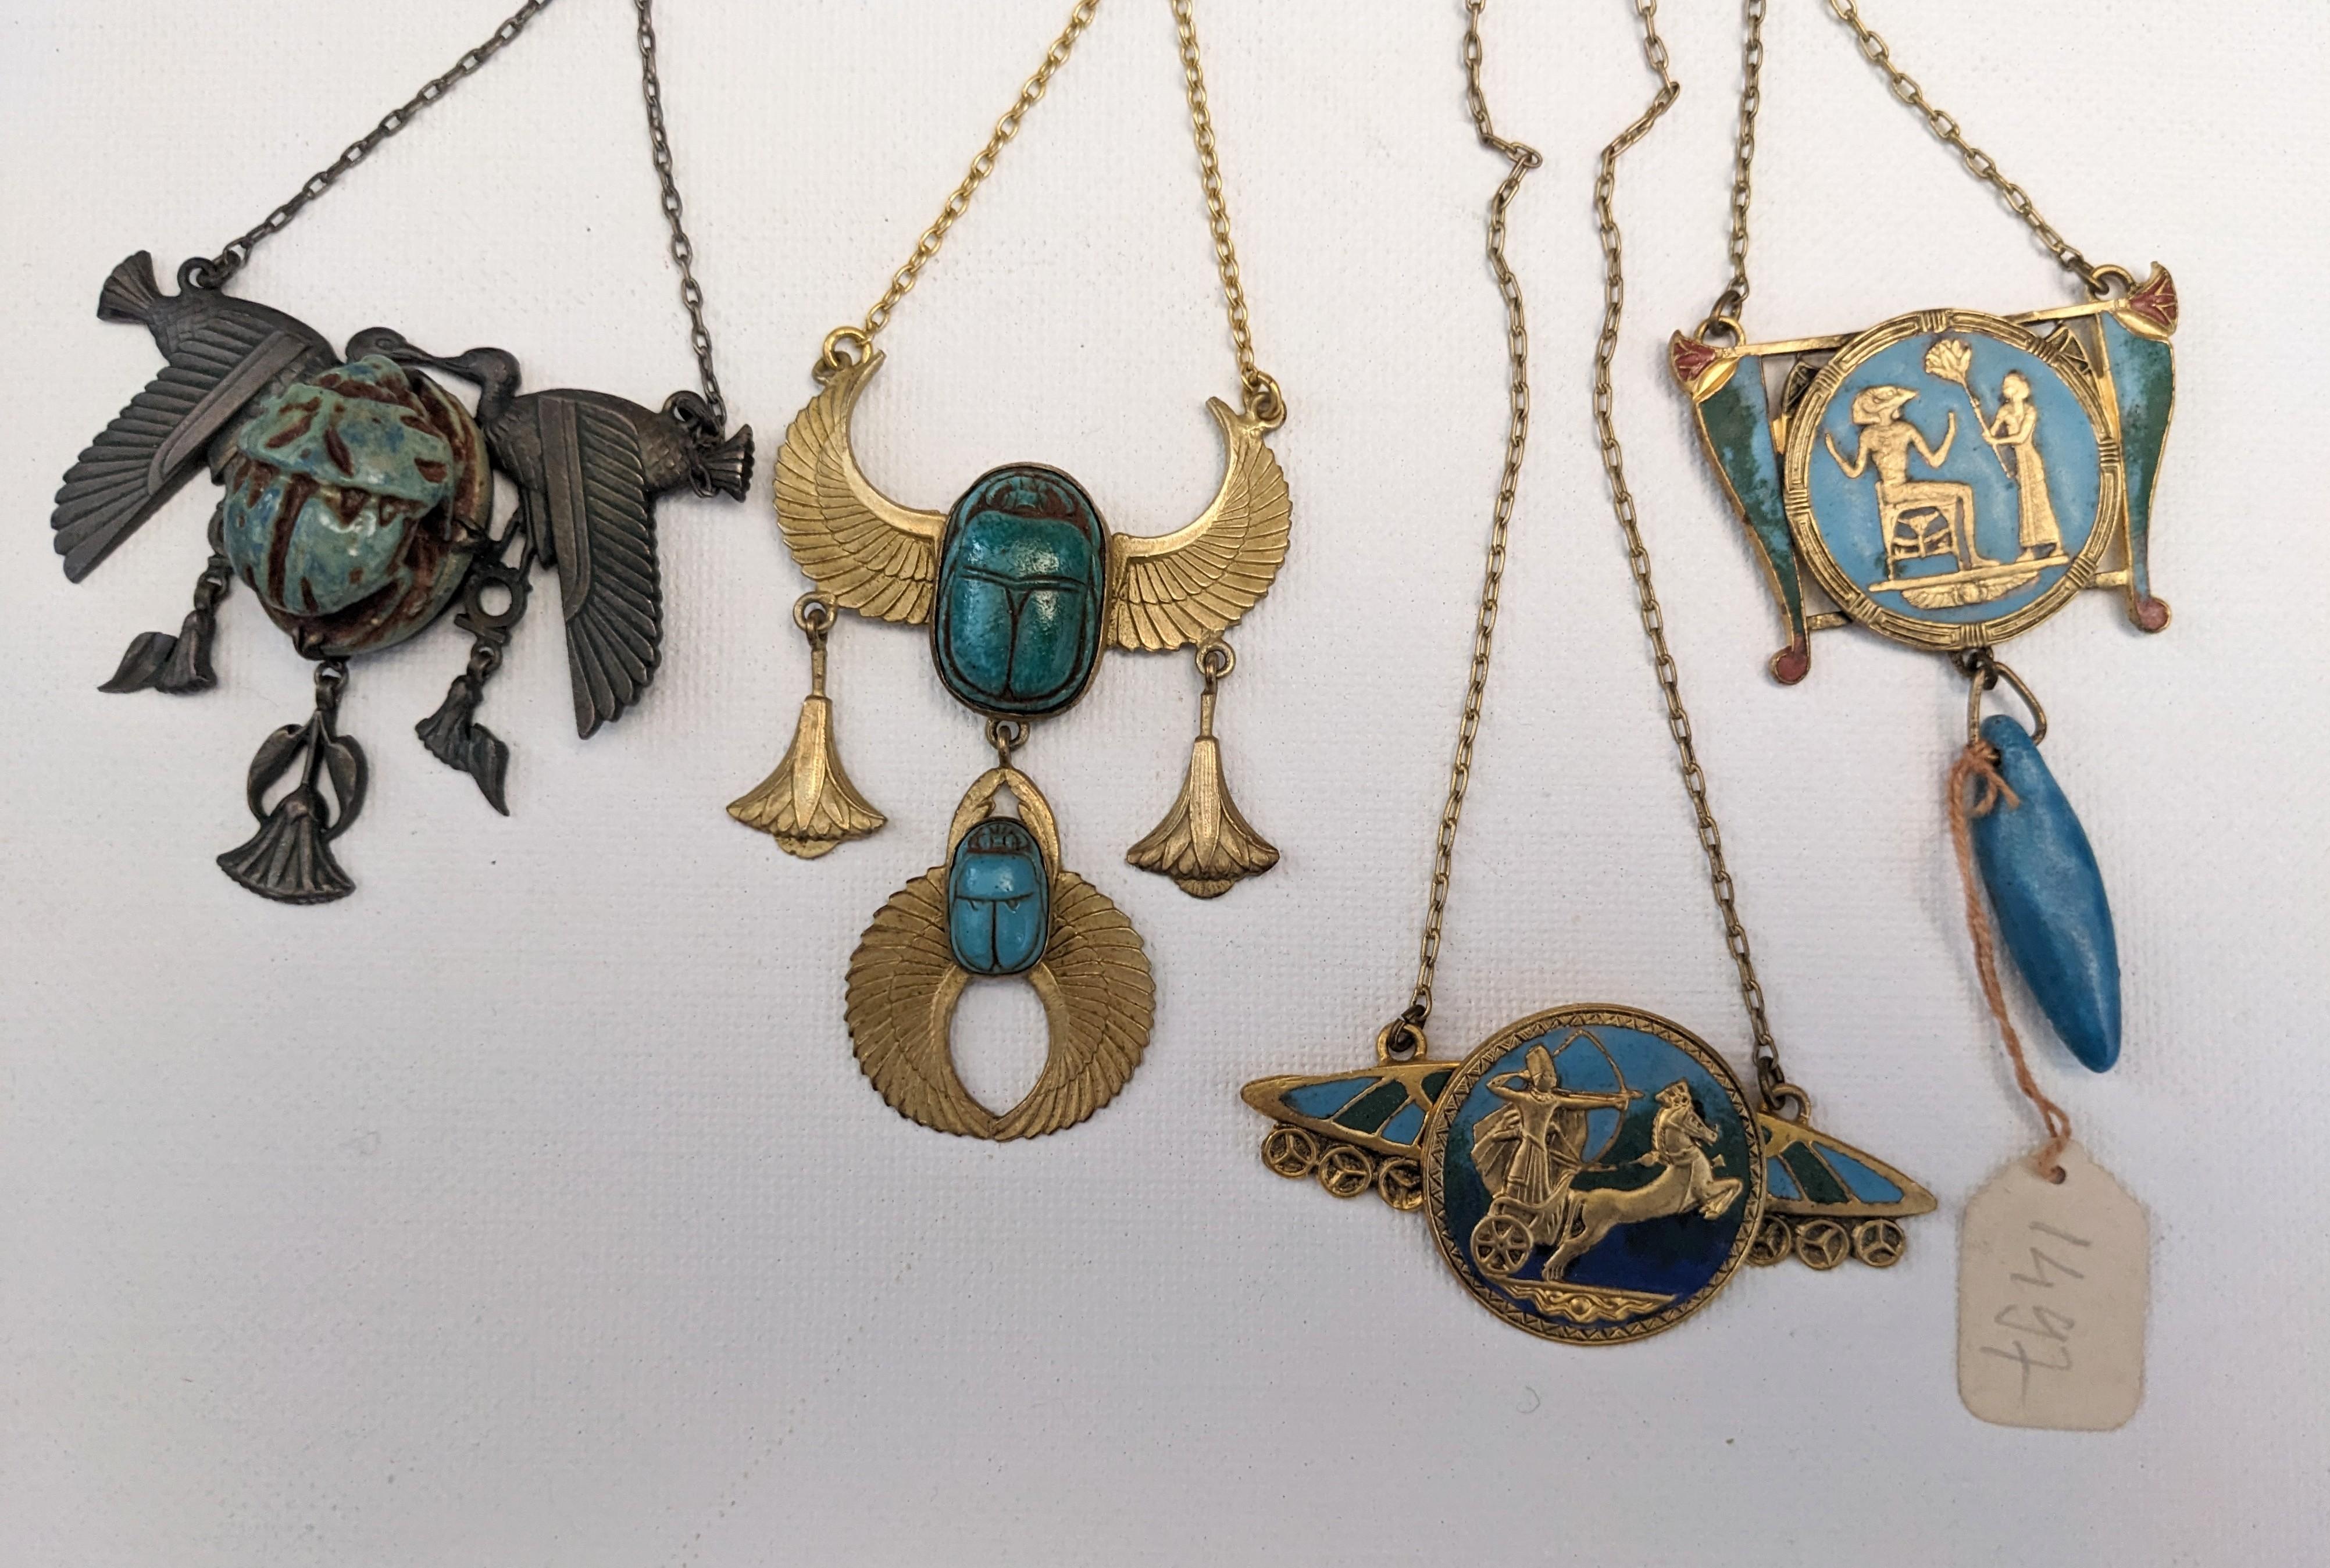 Egyptian Revival French Art Deco Necklaces from the 1920's. Old stock unworn pieces from a French factory. Many designs available in gilt or silver gilt finish decorated with enamels and glass or pottery stones. 
Various styles and designs. Some are